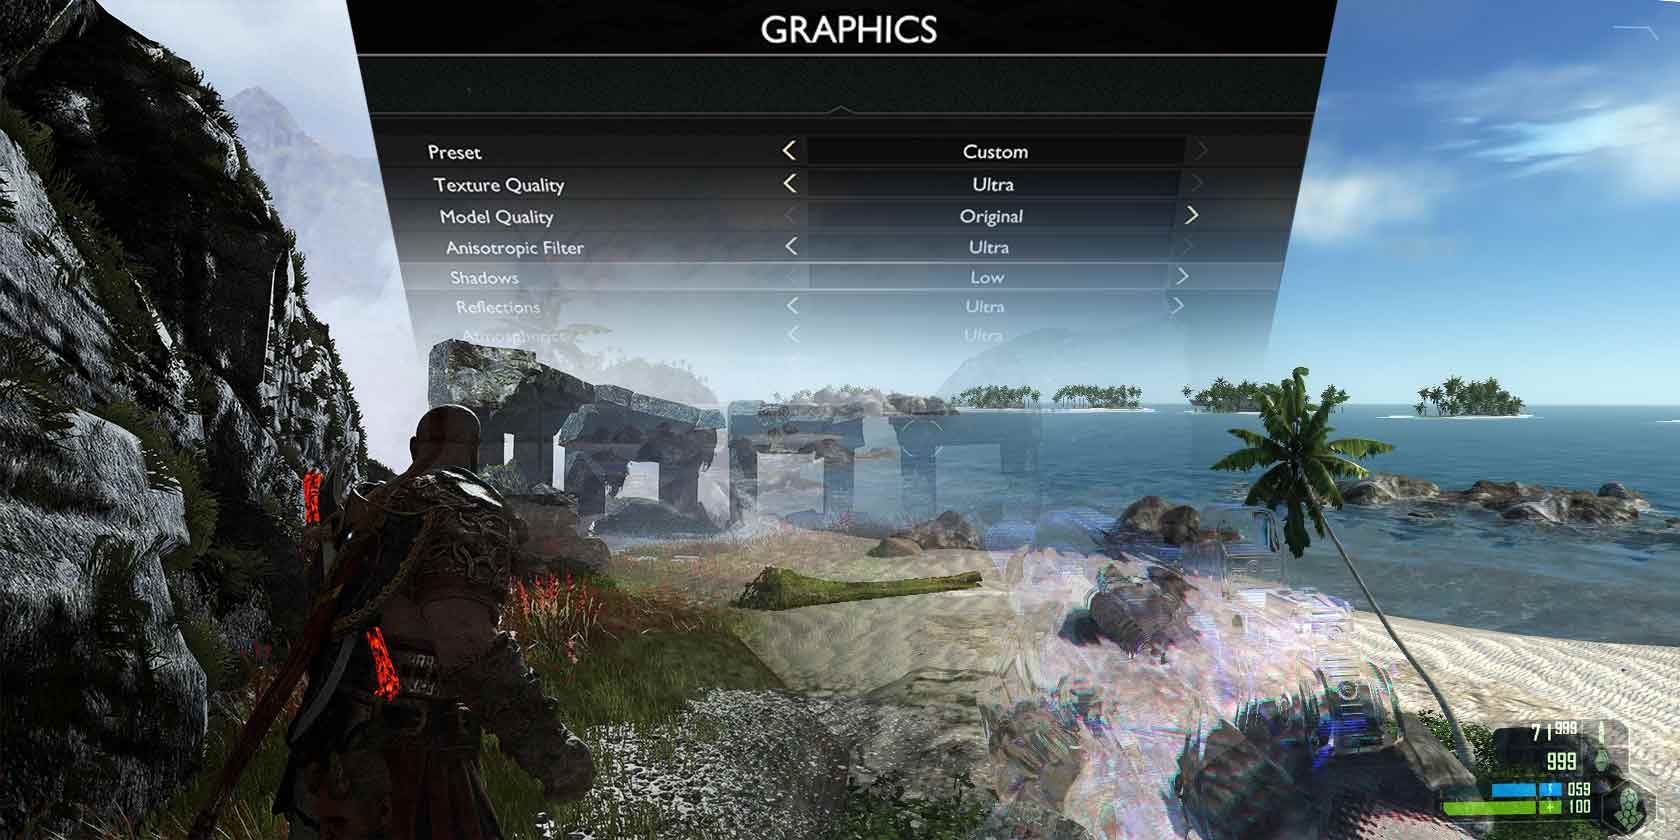 Why are PC game graphic presets looked down upon rather than custom settings?  - Quora